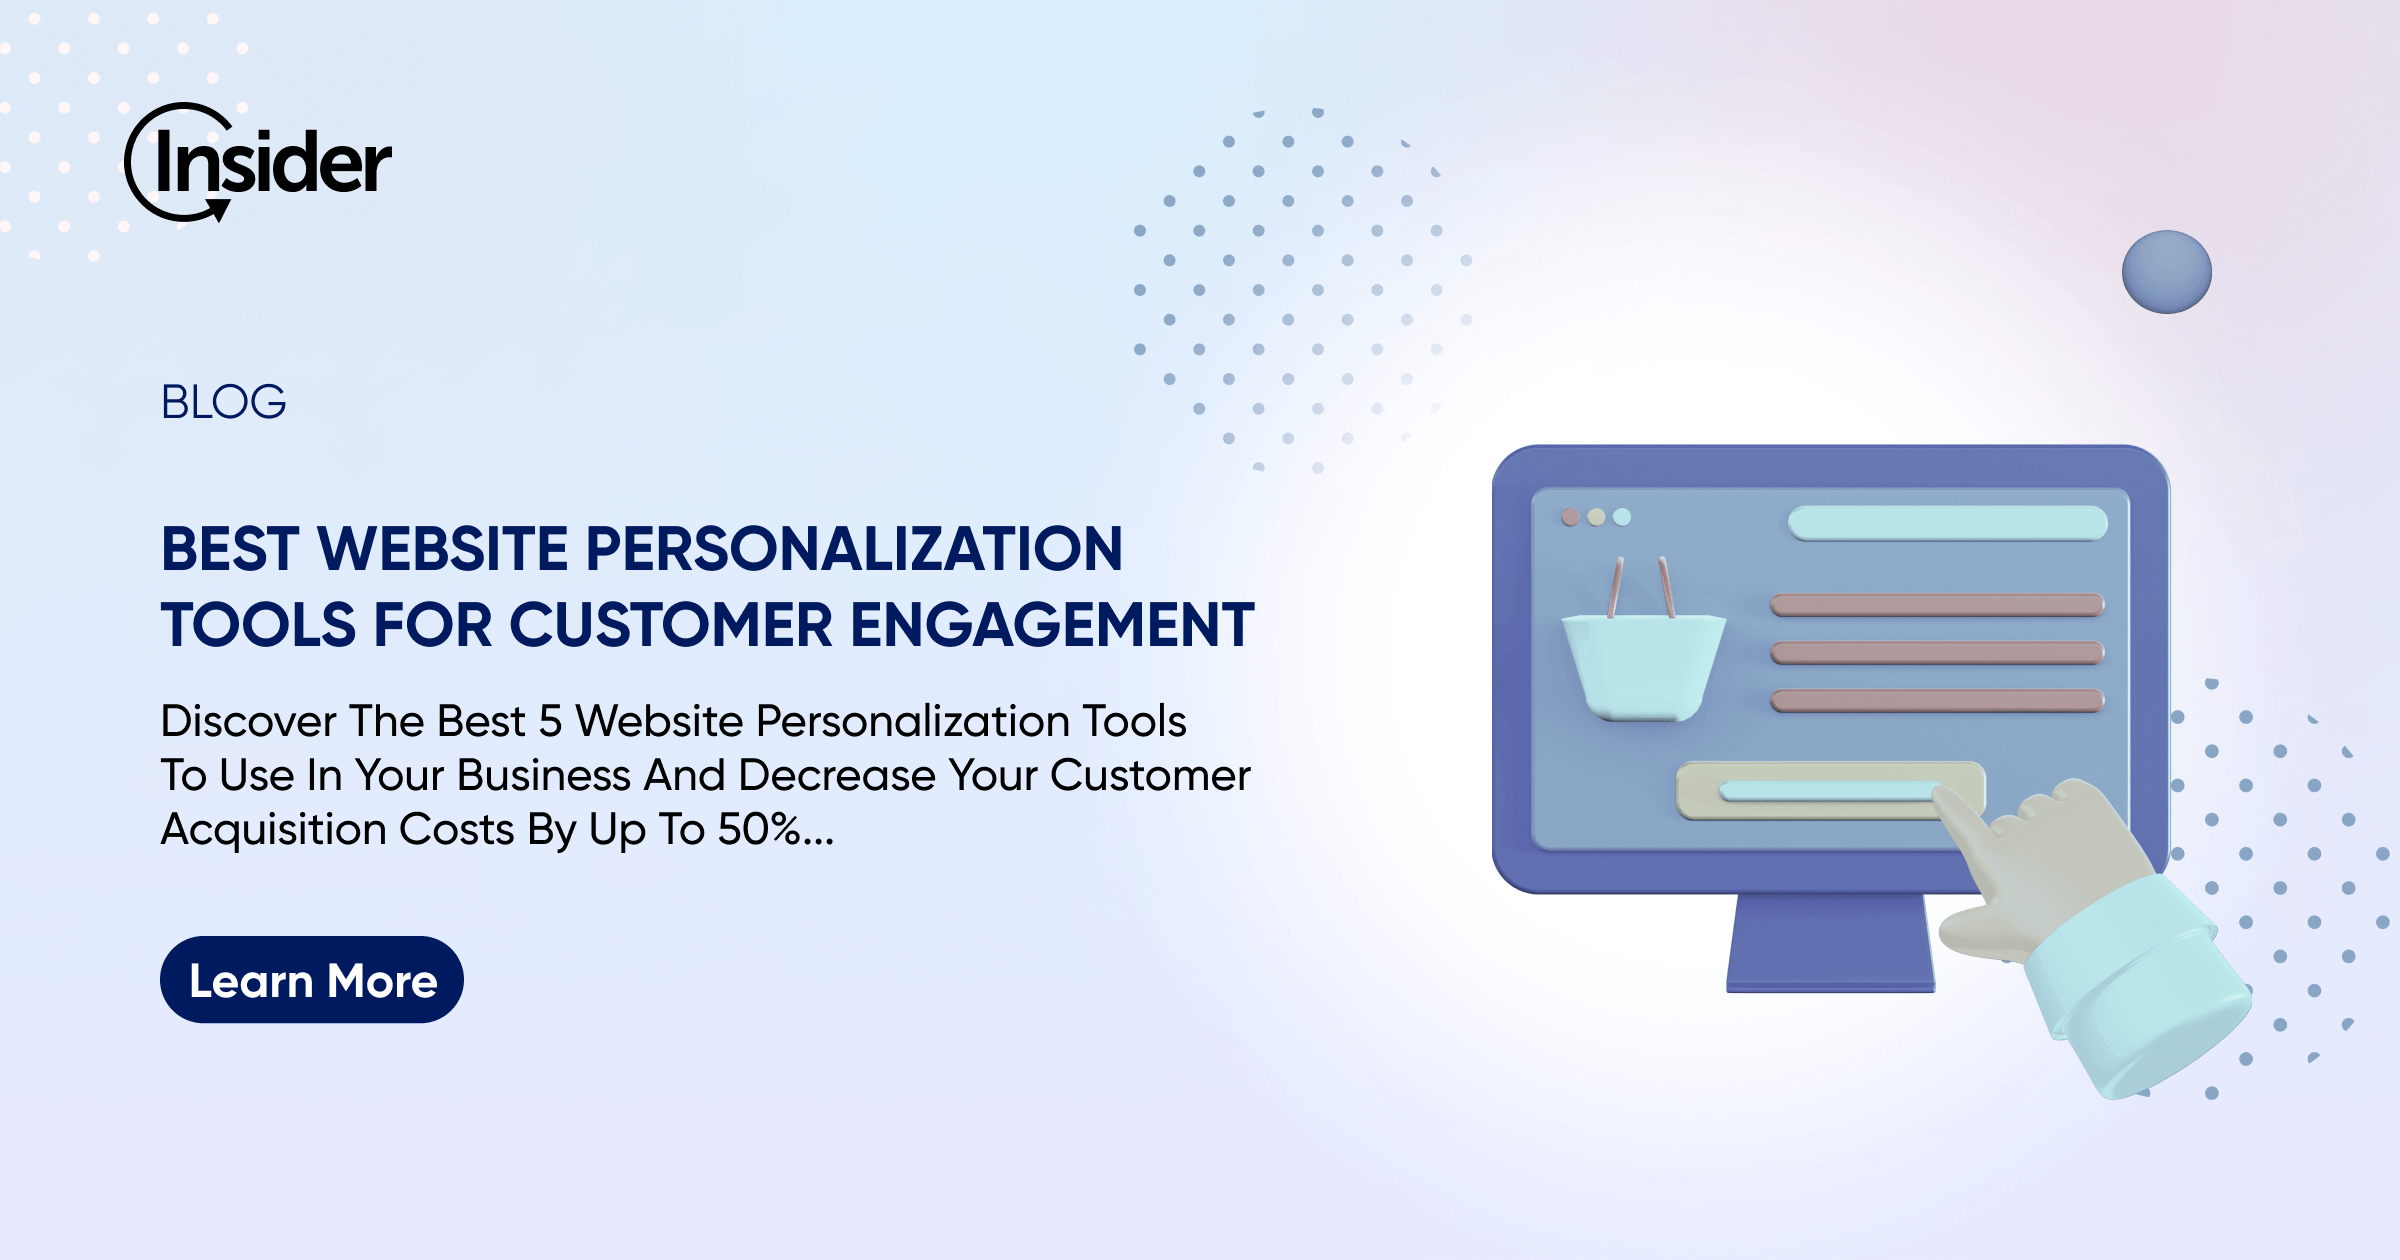 Best Website Personalization Tools For Customer Engagement